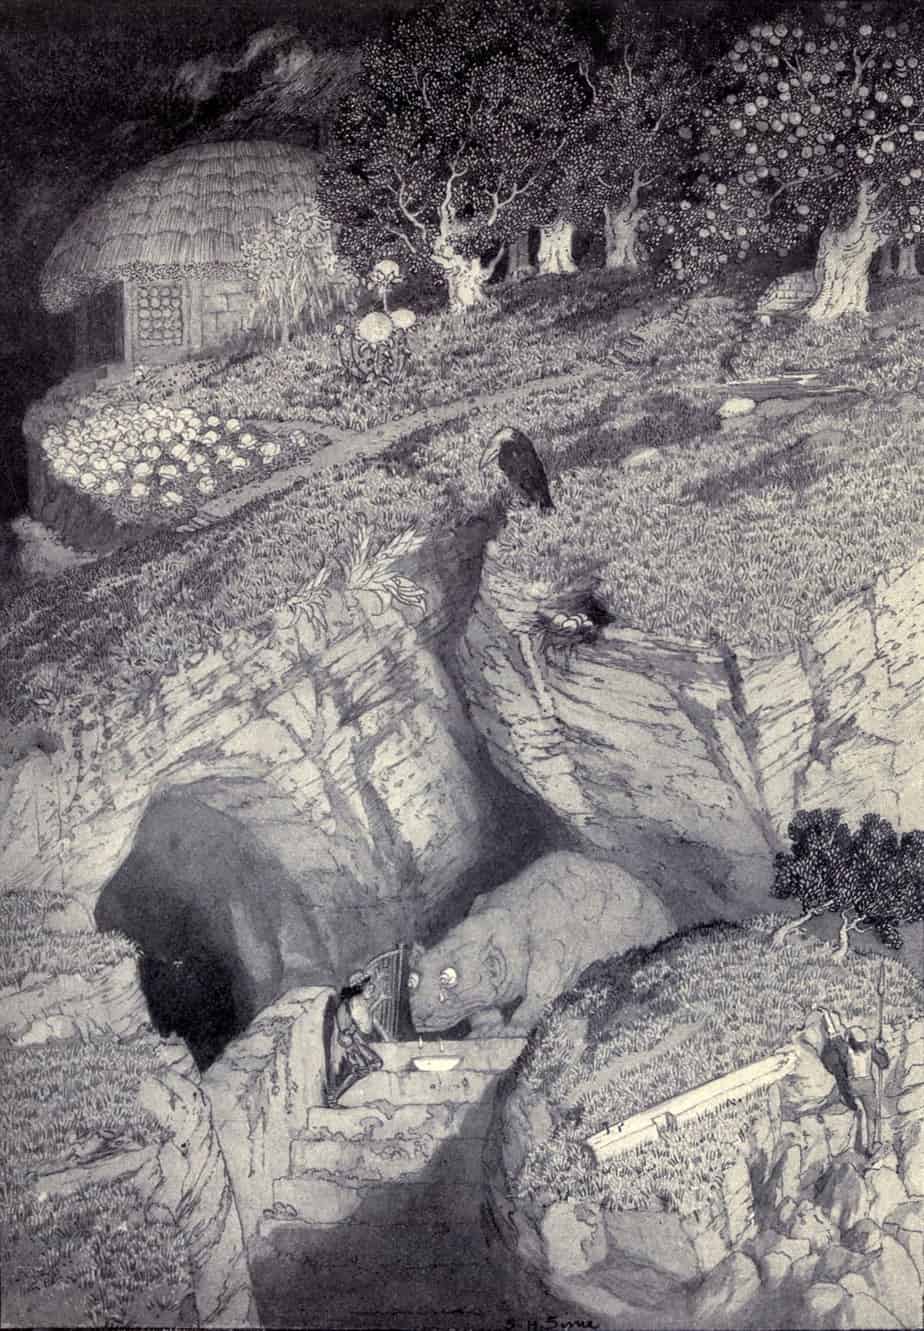 The book of wonder, a chronicle of little adventures at the edge of the world ca.1915 by Lord Dunsany illustrated by Sidney Herbert Sime